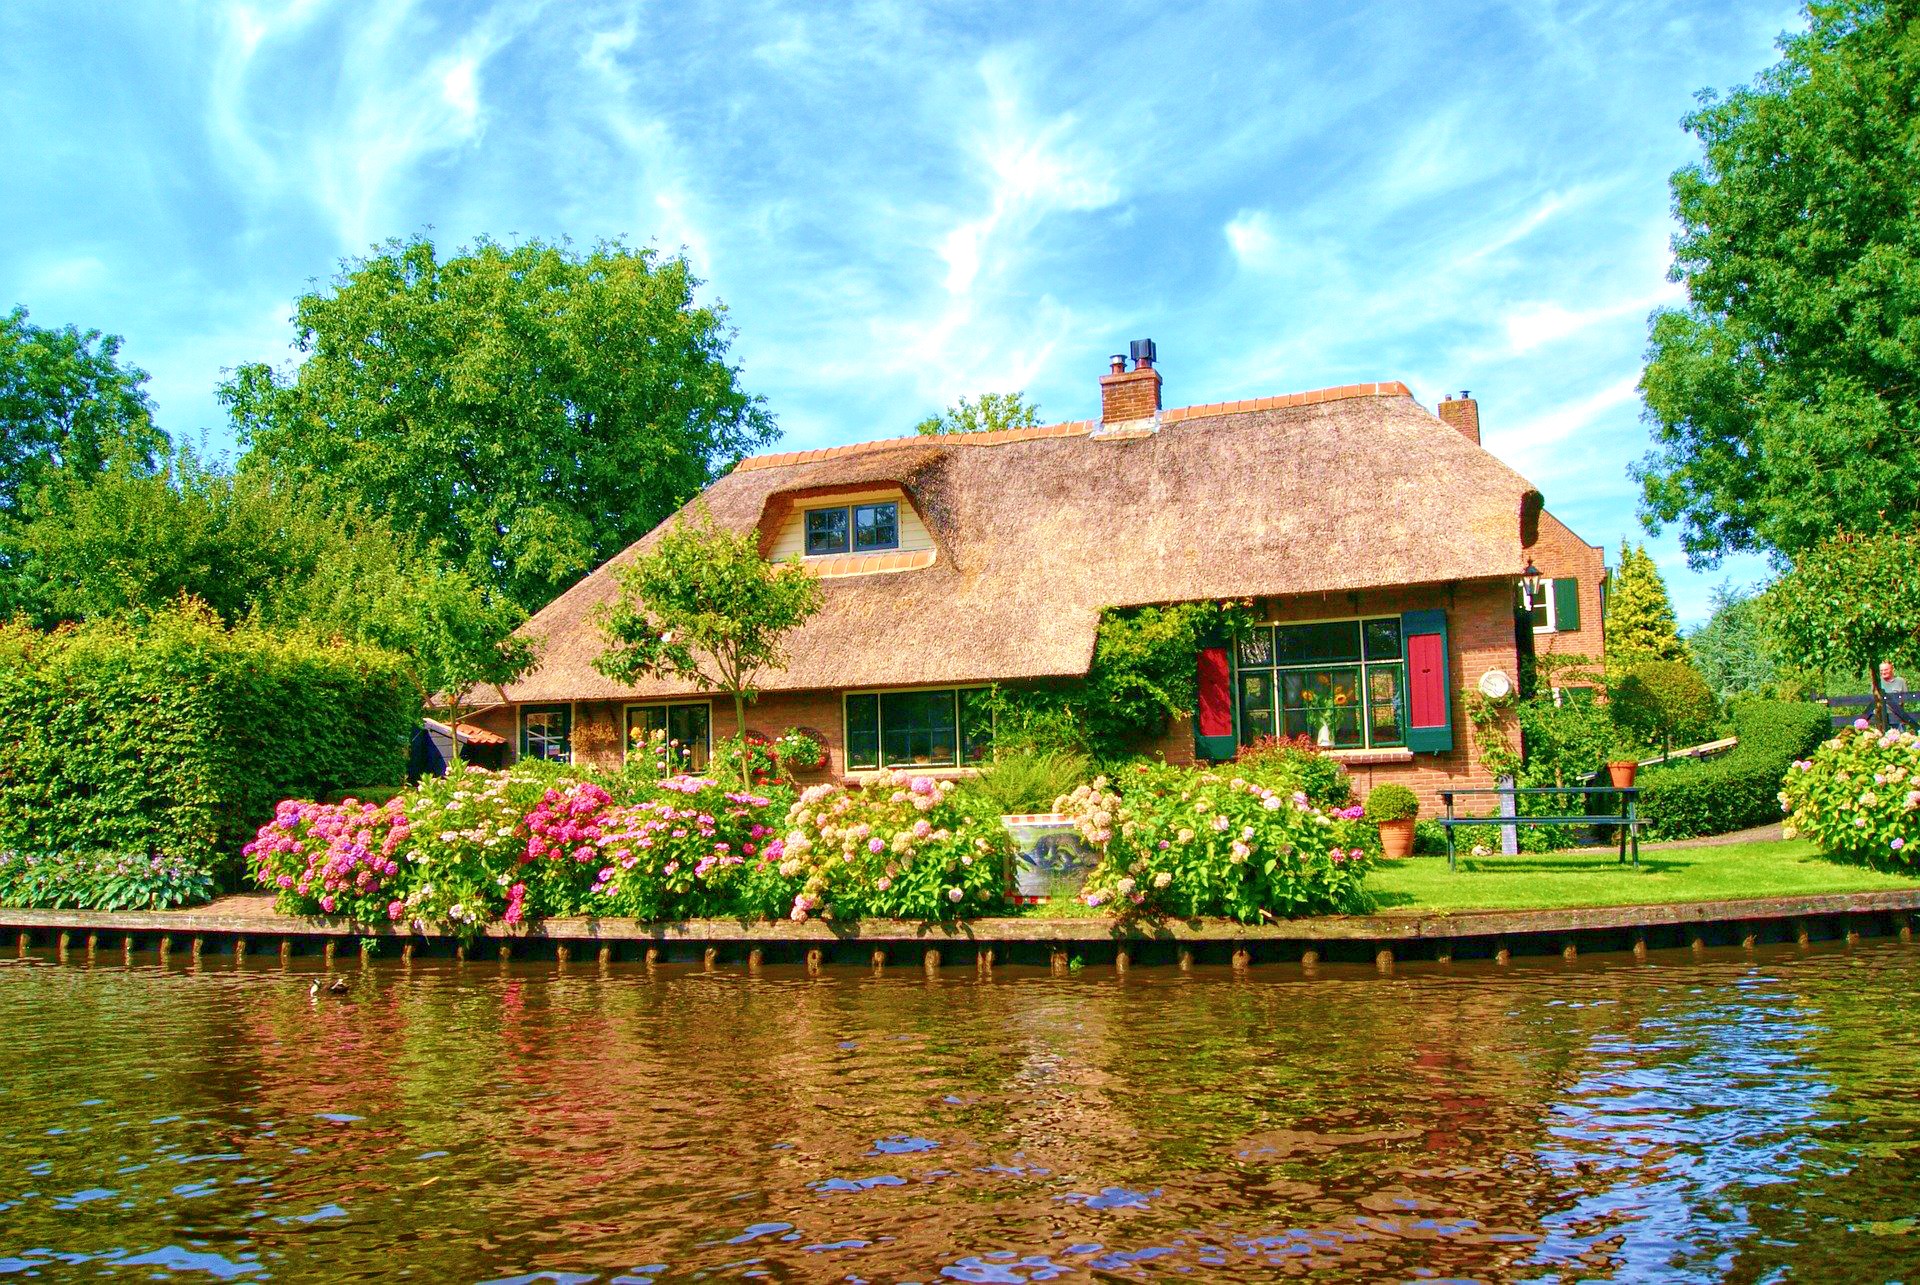 <img src="cottage.jpg" cottage by the river buying your first home"/> 